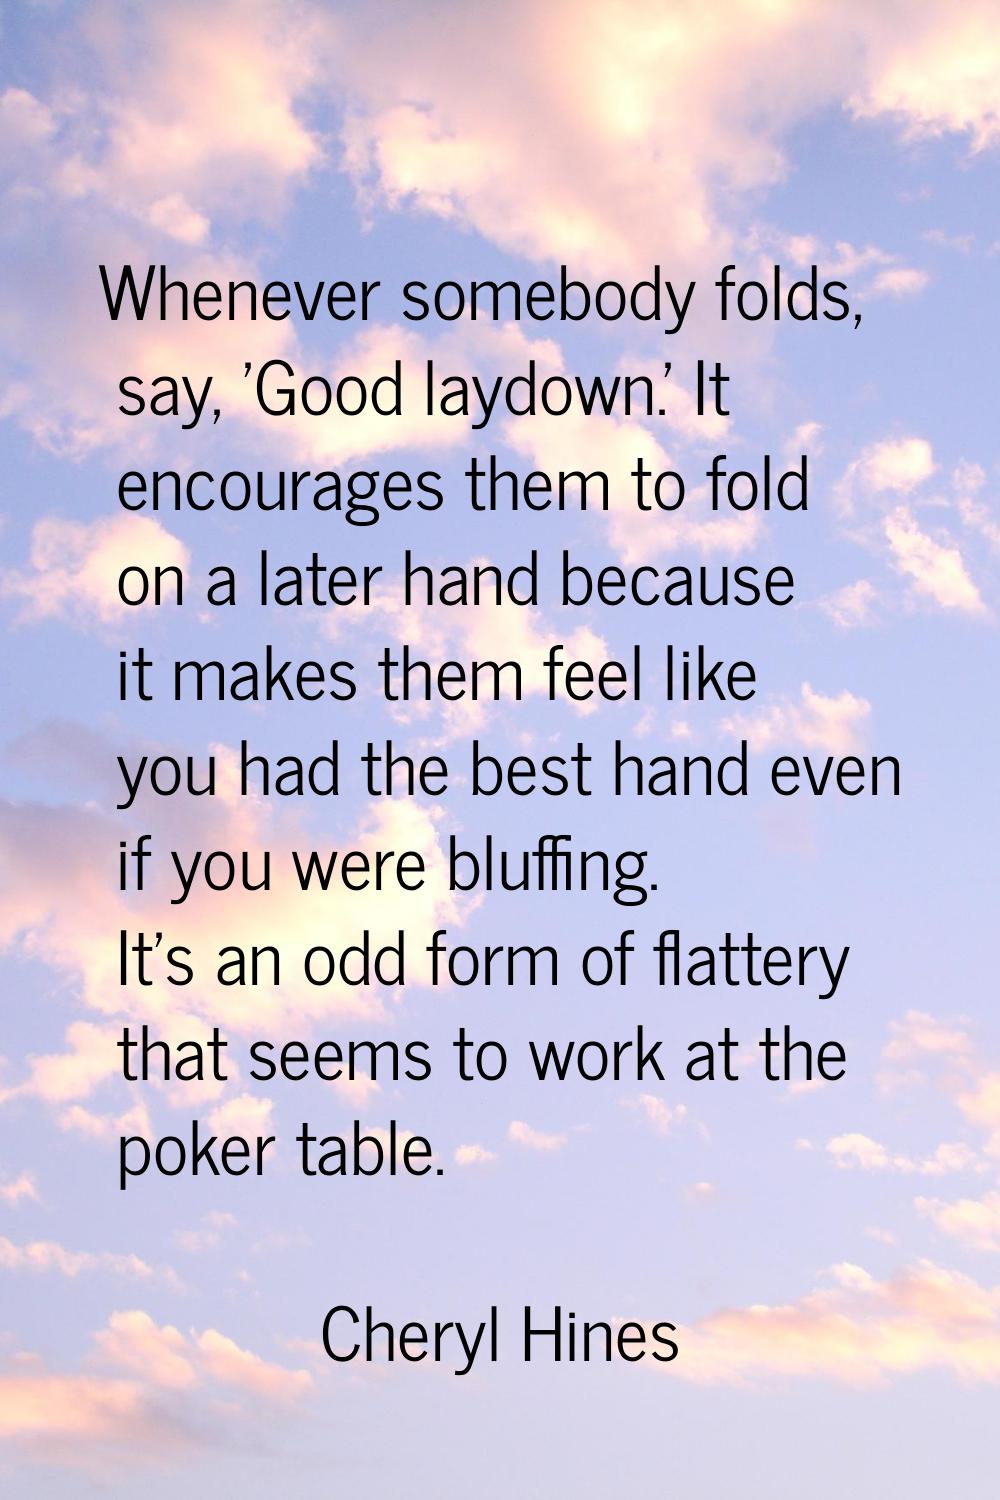 Whenever somebody folds, say, 'Good laydown.' It encourages them to fold on a later hand because it